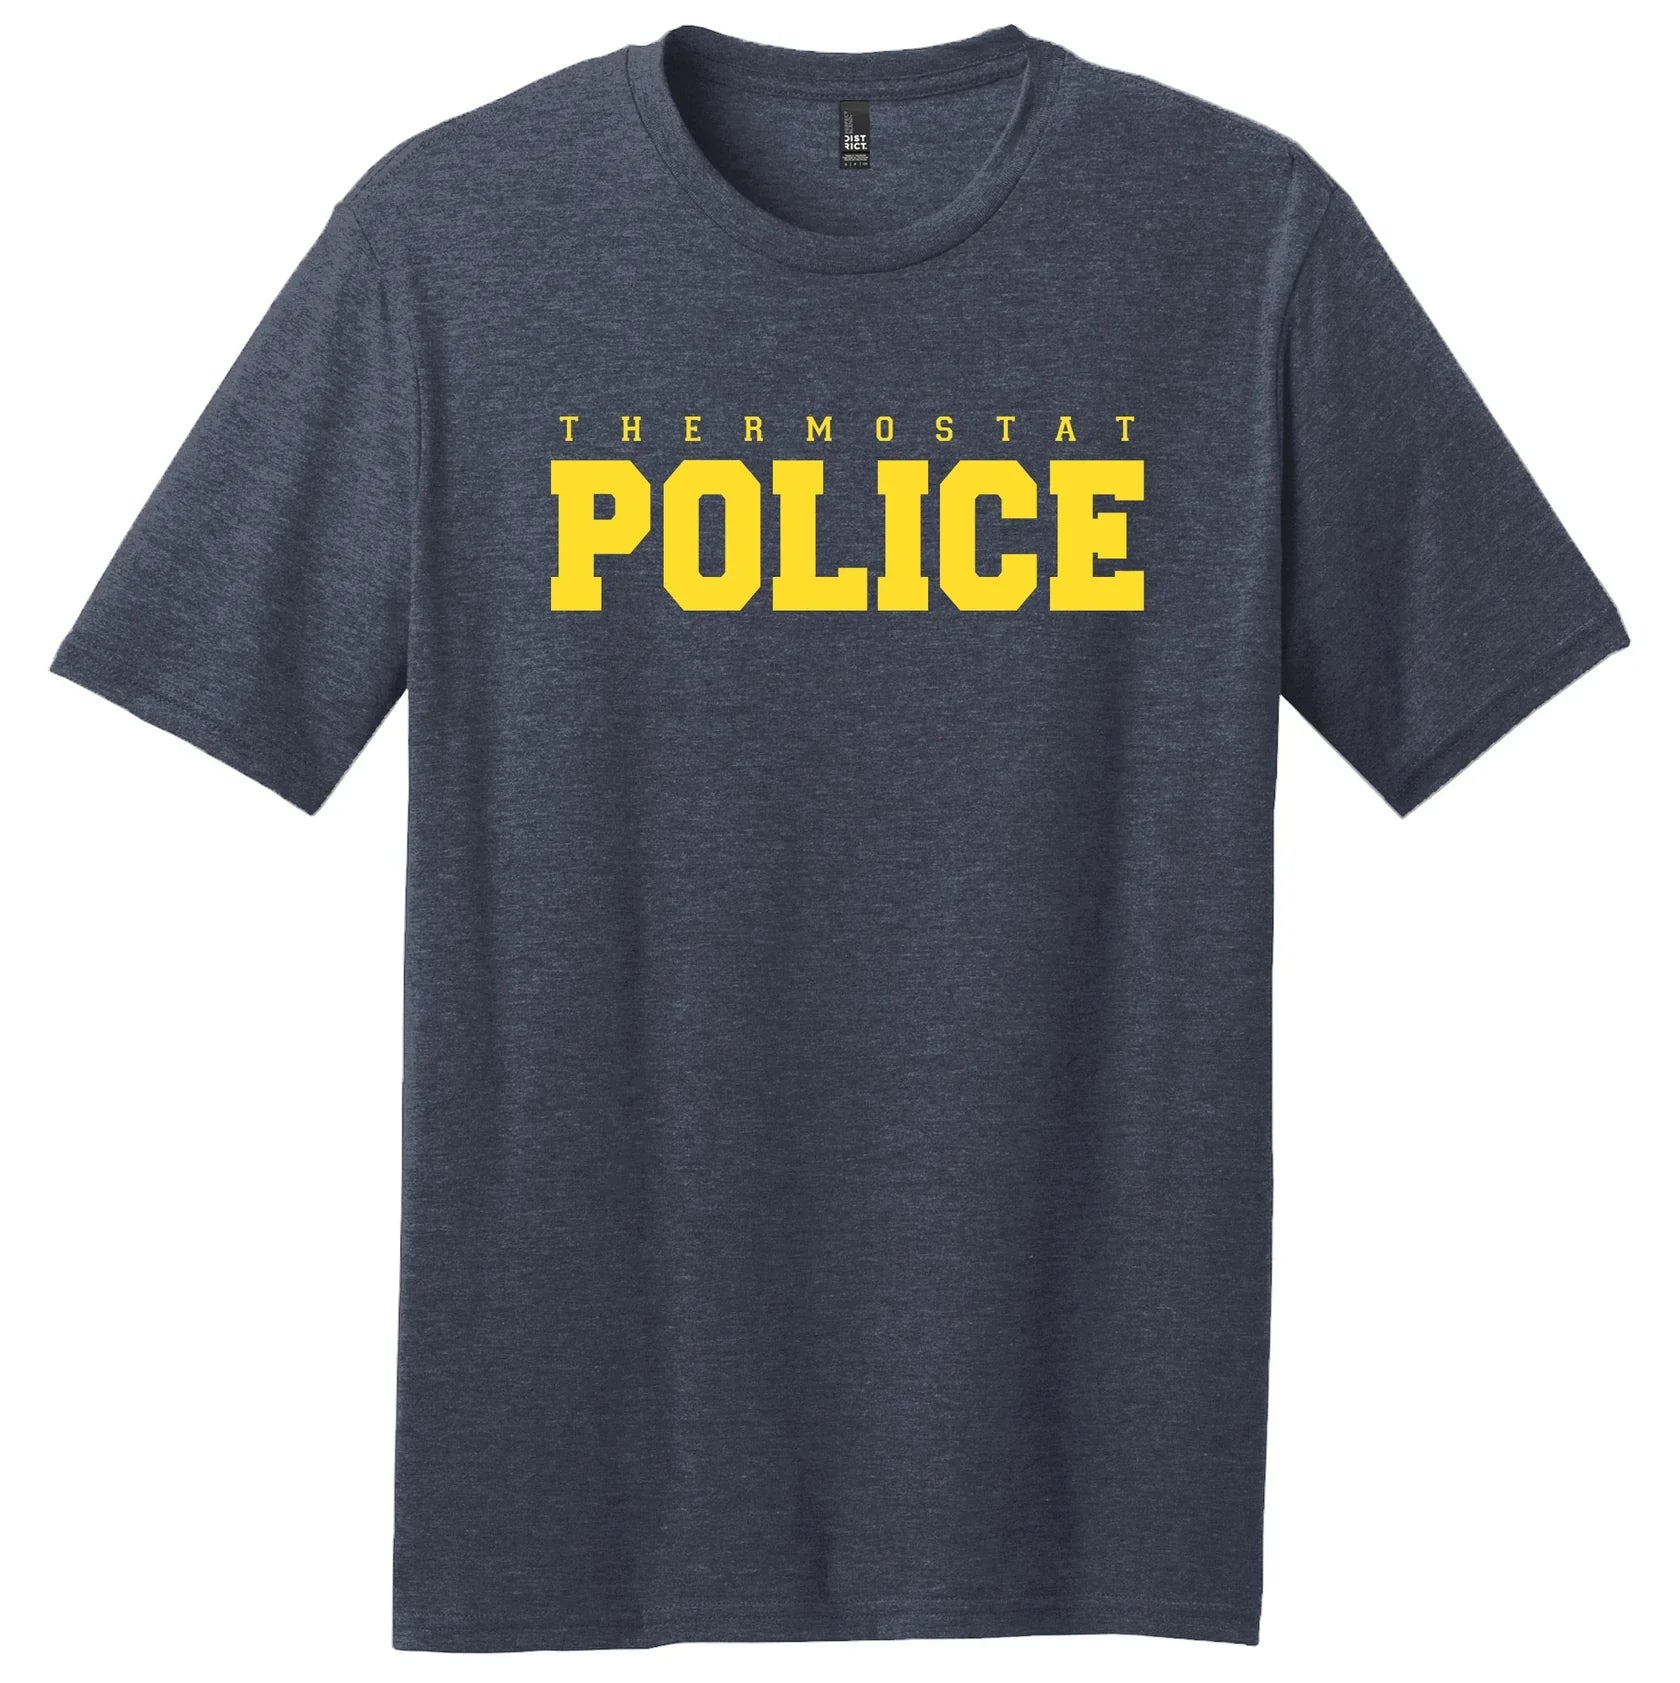 PREORDER: Thermostat Police Graphic Tee (Ships Early June)